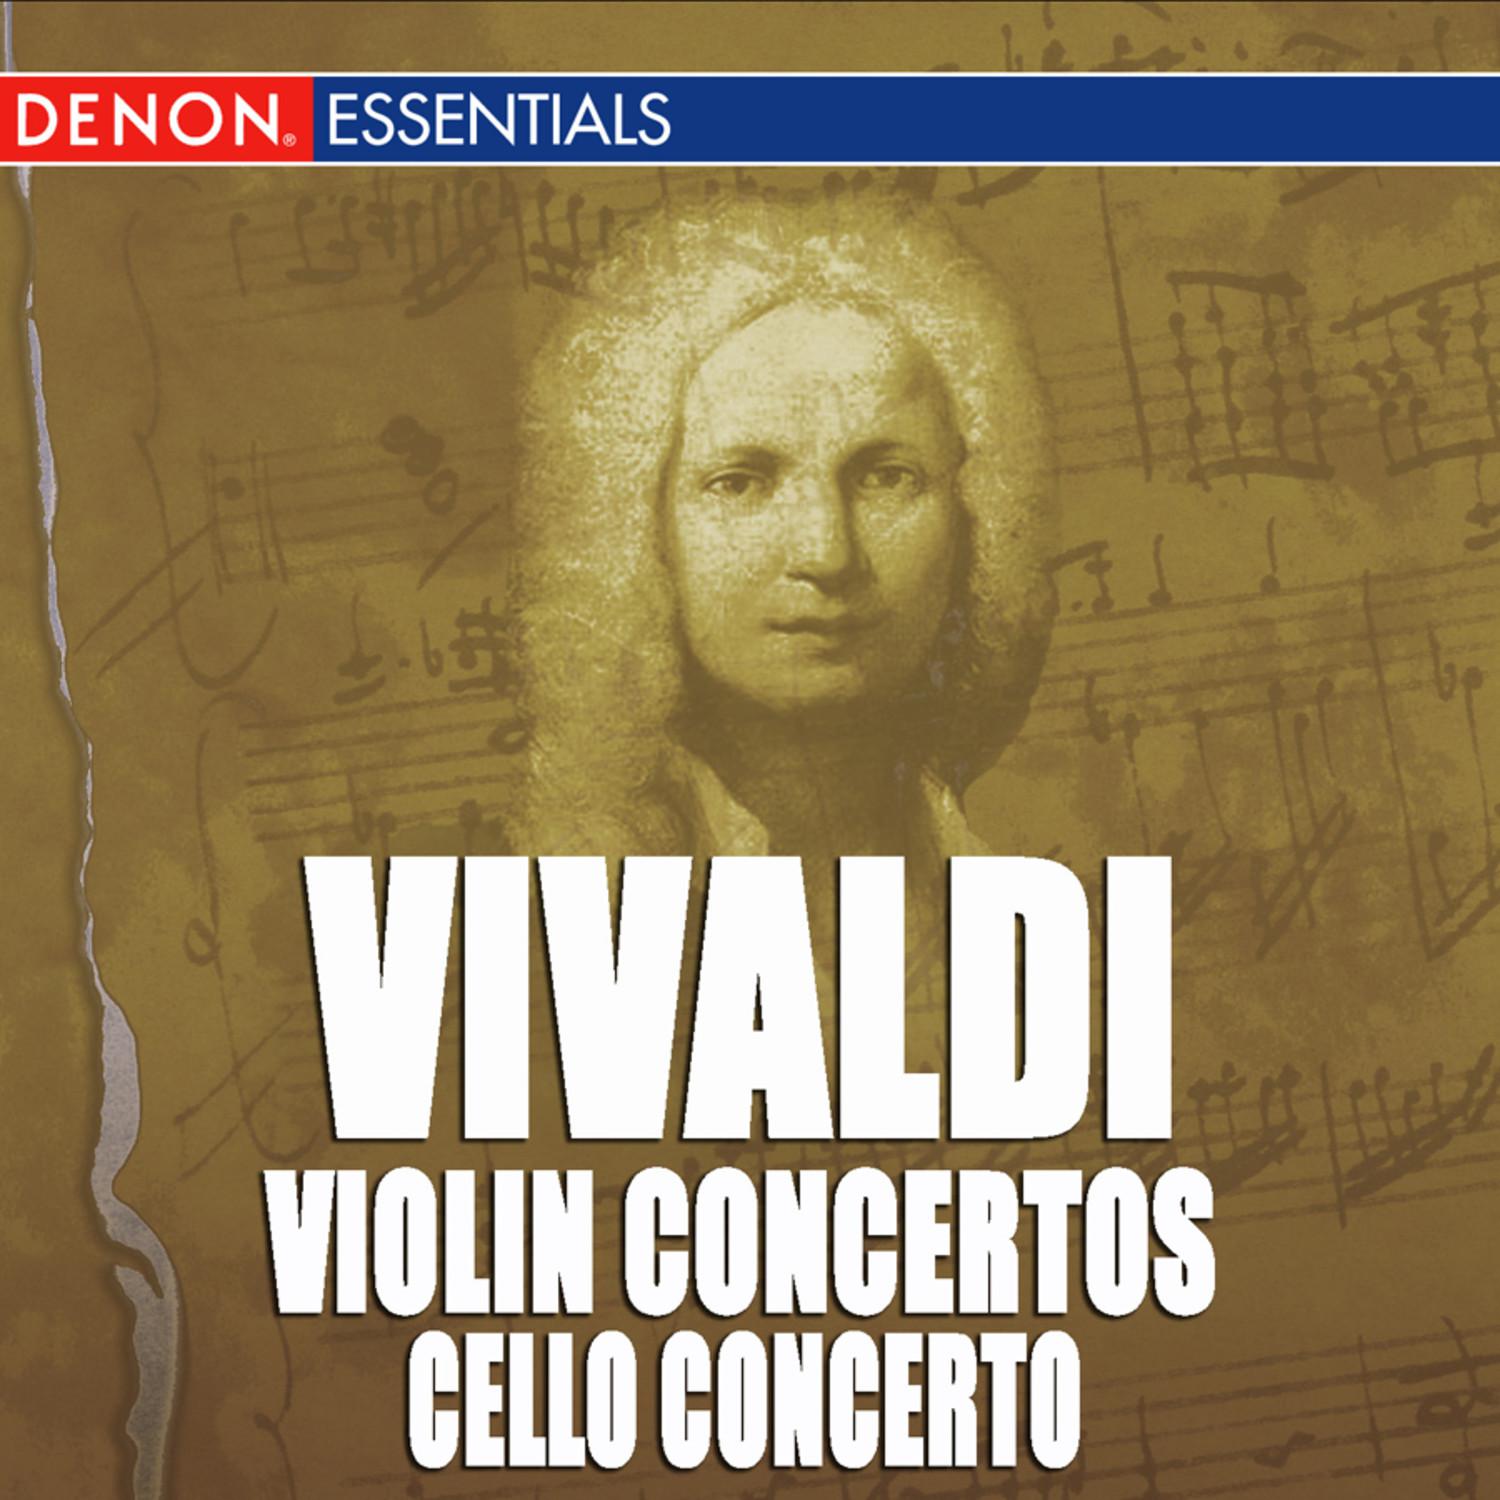 Concerto for 4 Violins, Cello, Strings and Bc No. 7 in F Major, Op. 3 RV 567: I. Andante